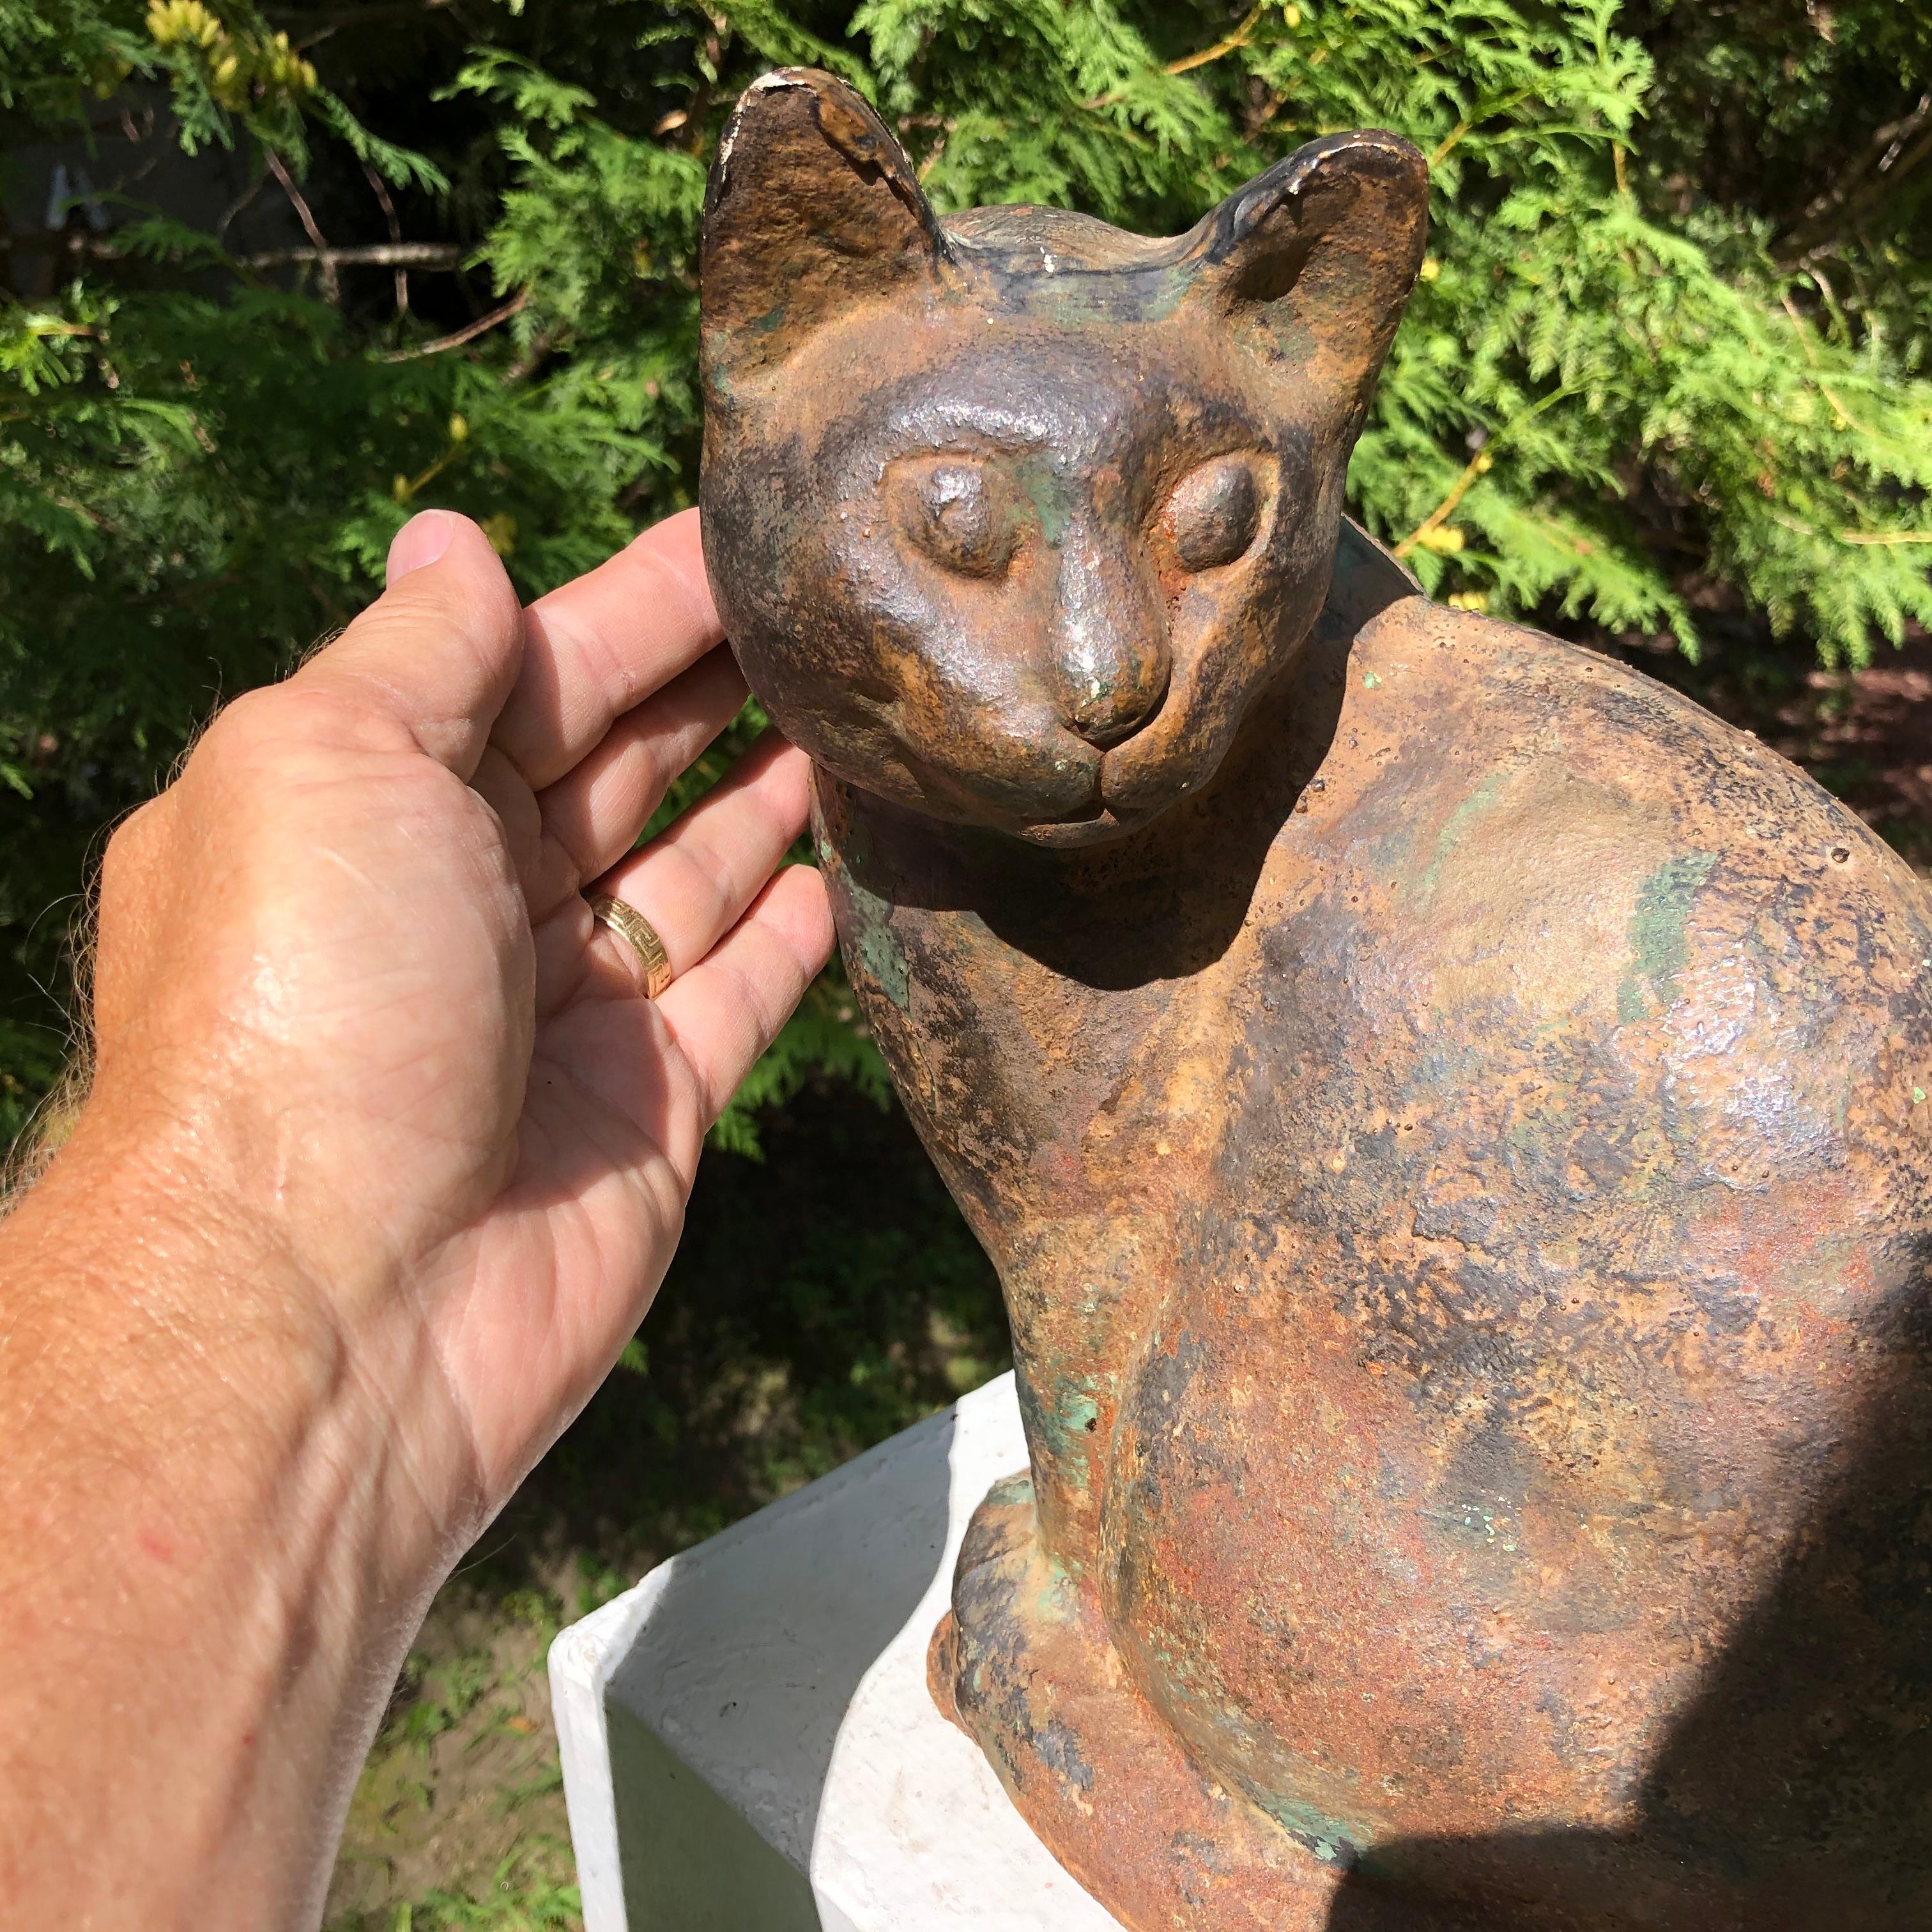 From Our Recent Japanese Acquisitions Travels.

A charming Japanese antique cat hand cast and crafted in sturdy iron.

Attractive pose and even more attractive face.

Dimensions: 12.5 inches high and 10 inches wide

Only one.

We have been